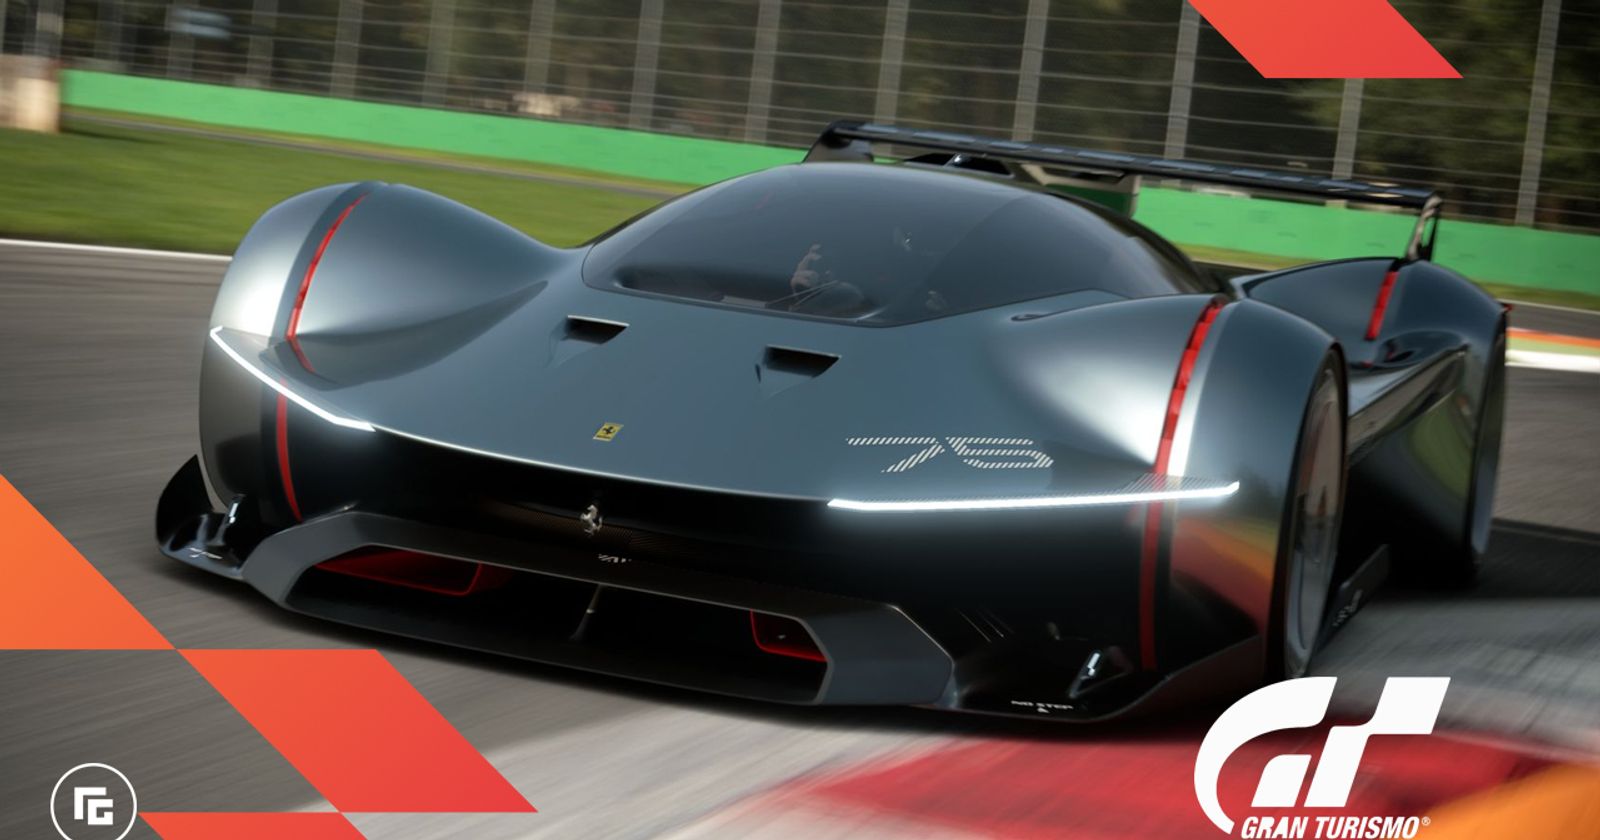 Gran Turismo 7 Releases Today as Players Share First Impressions – GTPlanet